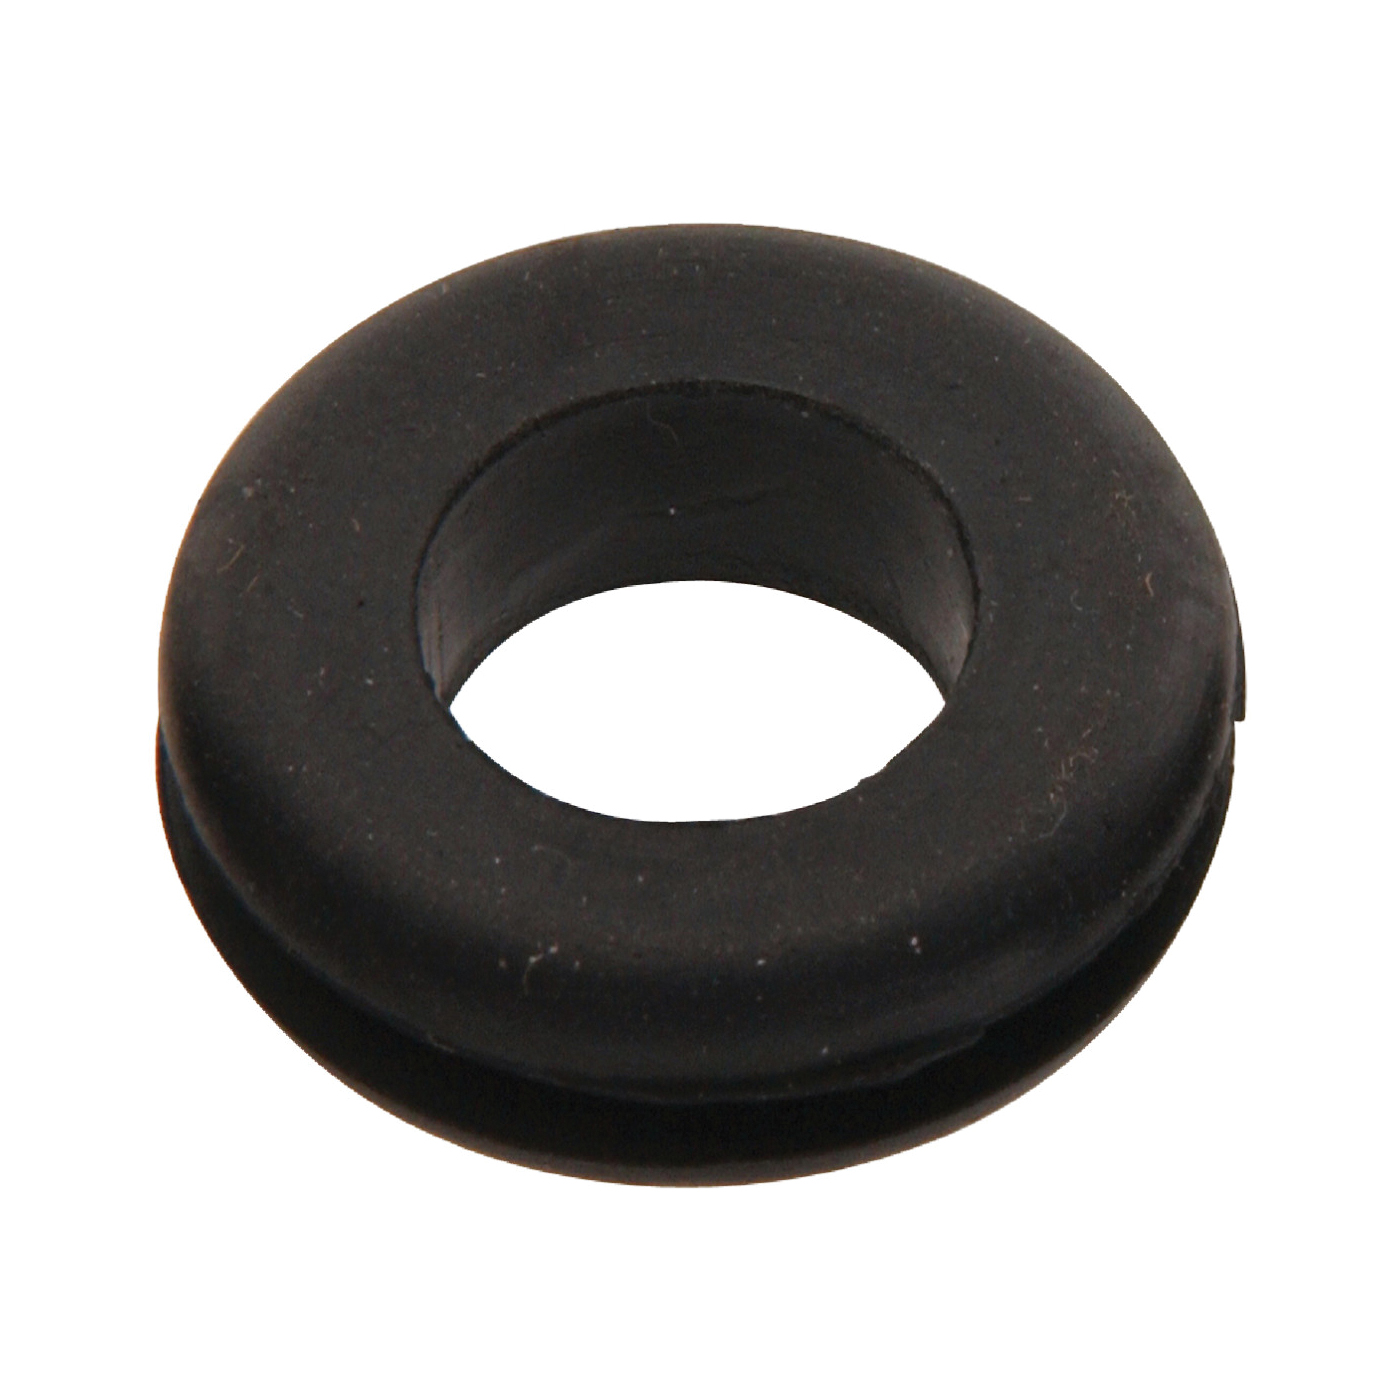 881262 Grommet, Rubber, 5/16 in Thick Panel